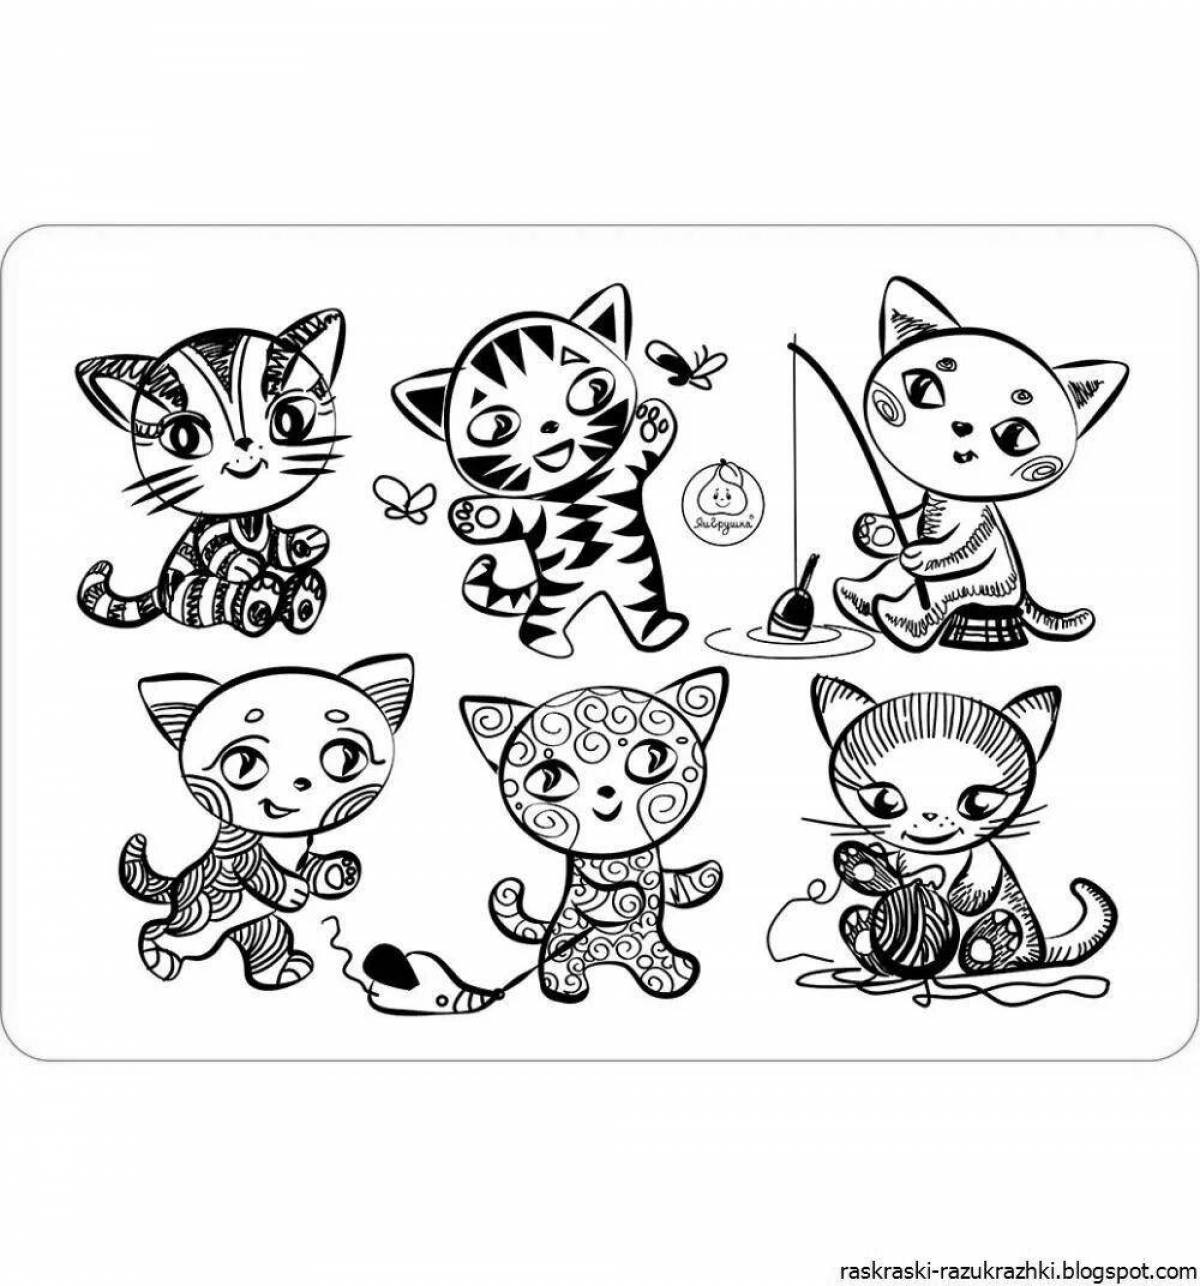 Snuggly-wuggly kittens coloring page